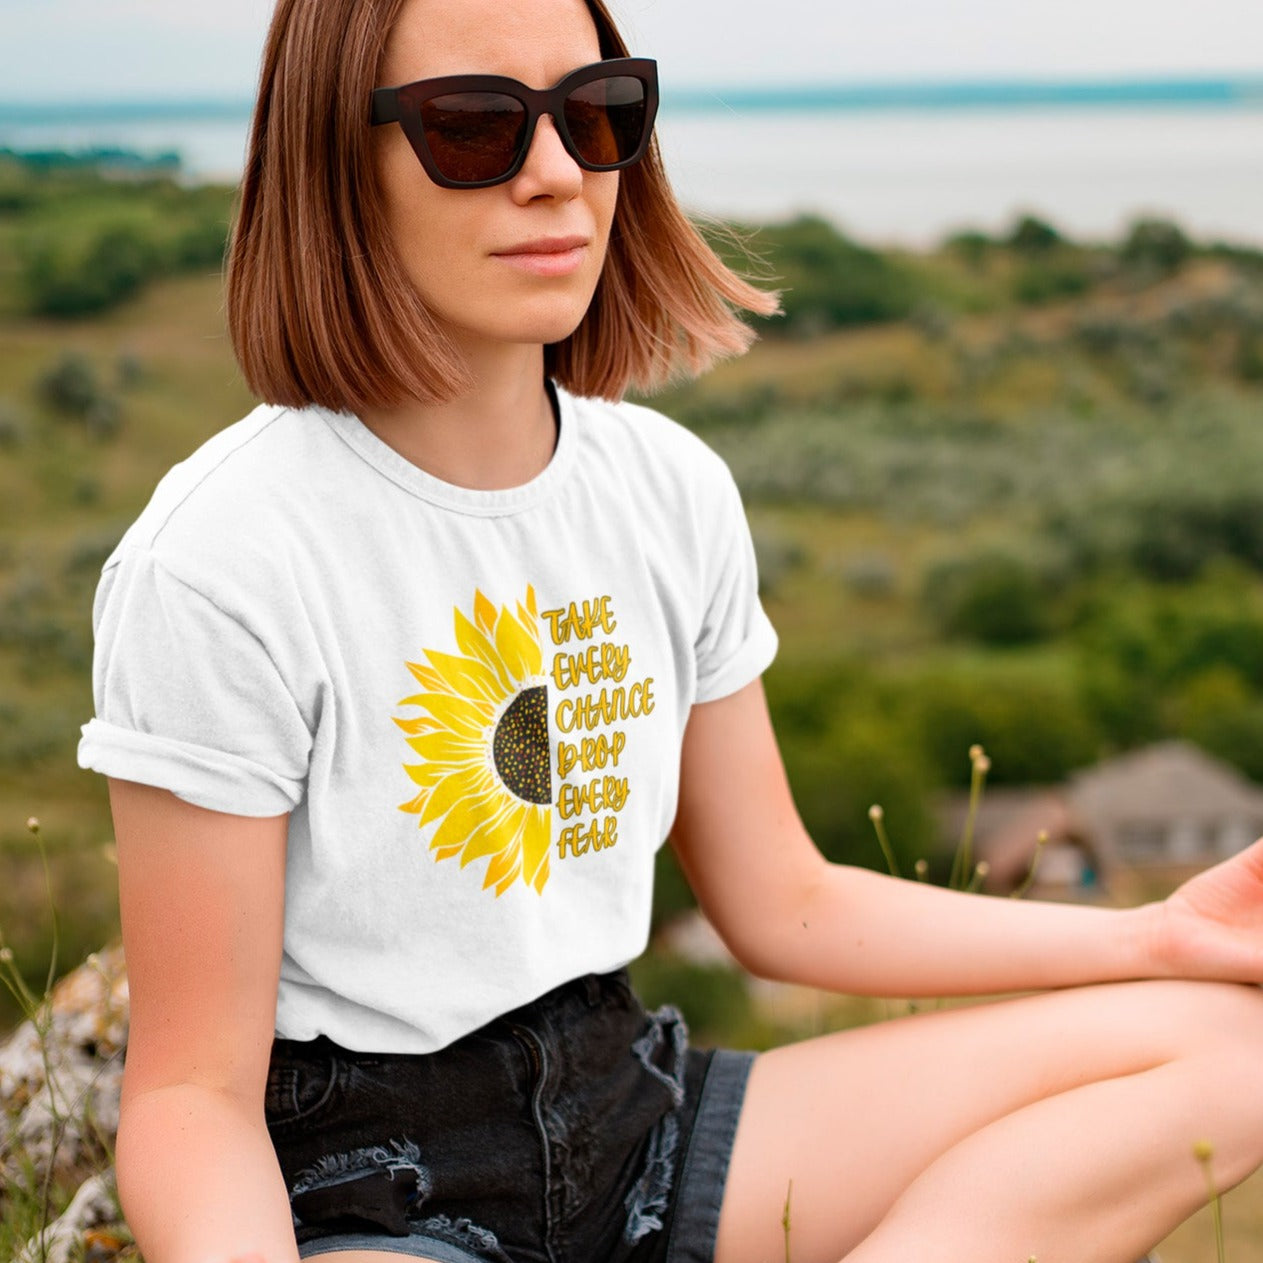 take-every-chance-drop-every-fear-white-t-shirt-sunflower-mockup-of-a-woman-meditating-after-a-hike